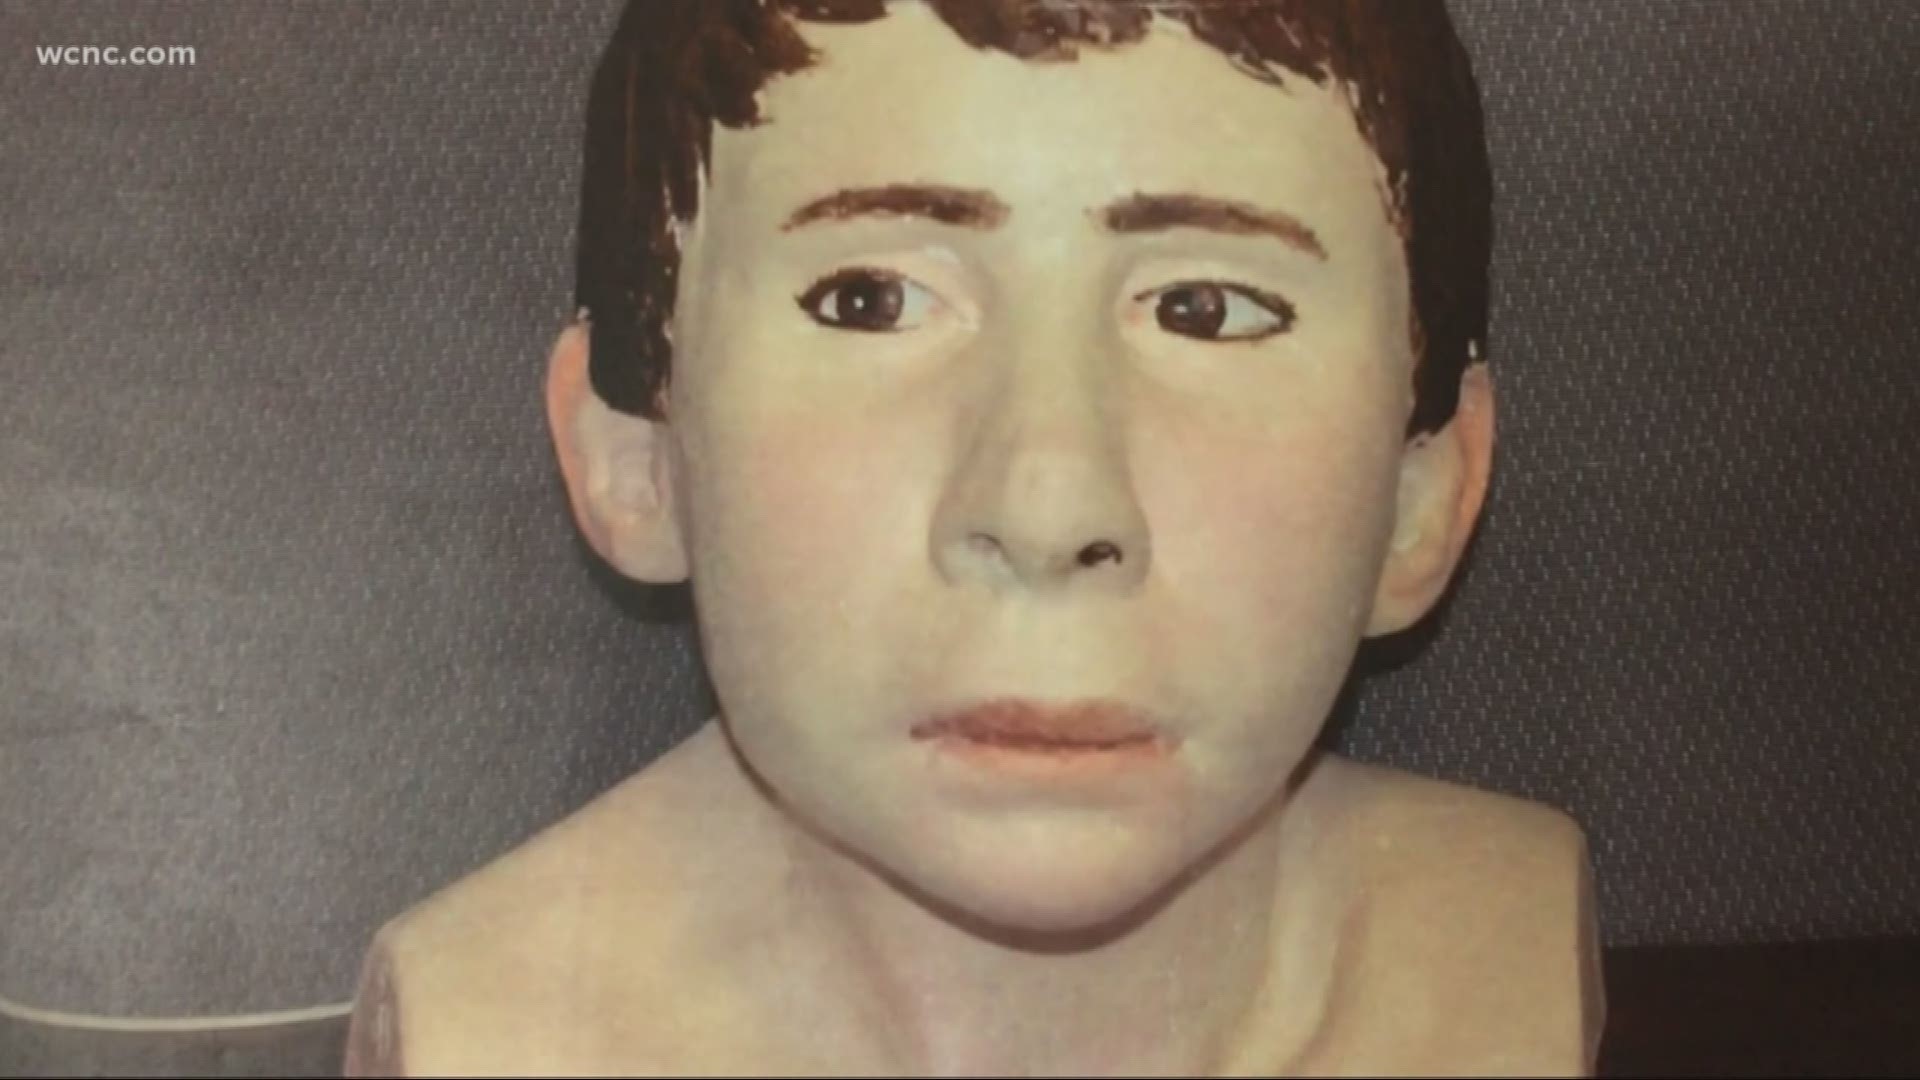 At the time, he was called 'the boy without a name. This week marks 20 years since the skeletal remains of a little boy were found on I-85.